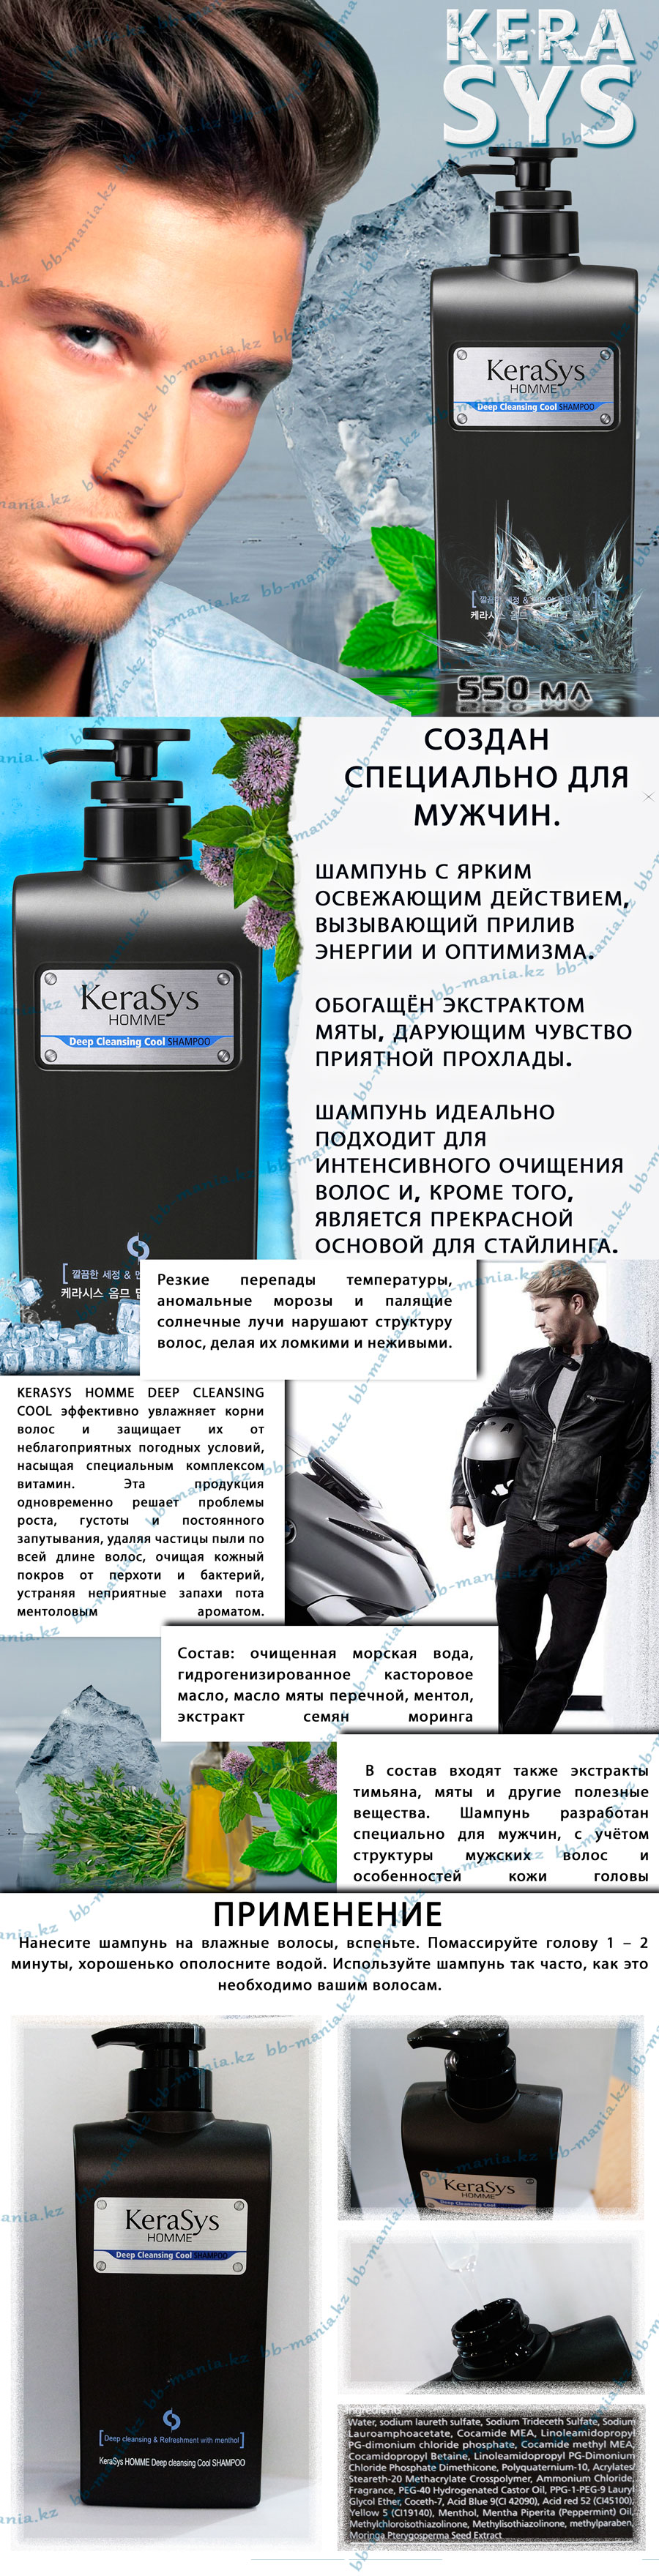 HOMME-Deep-Cleansing-Cool-Shampoo-[Kerasys]